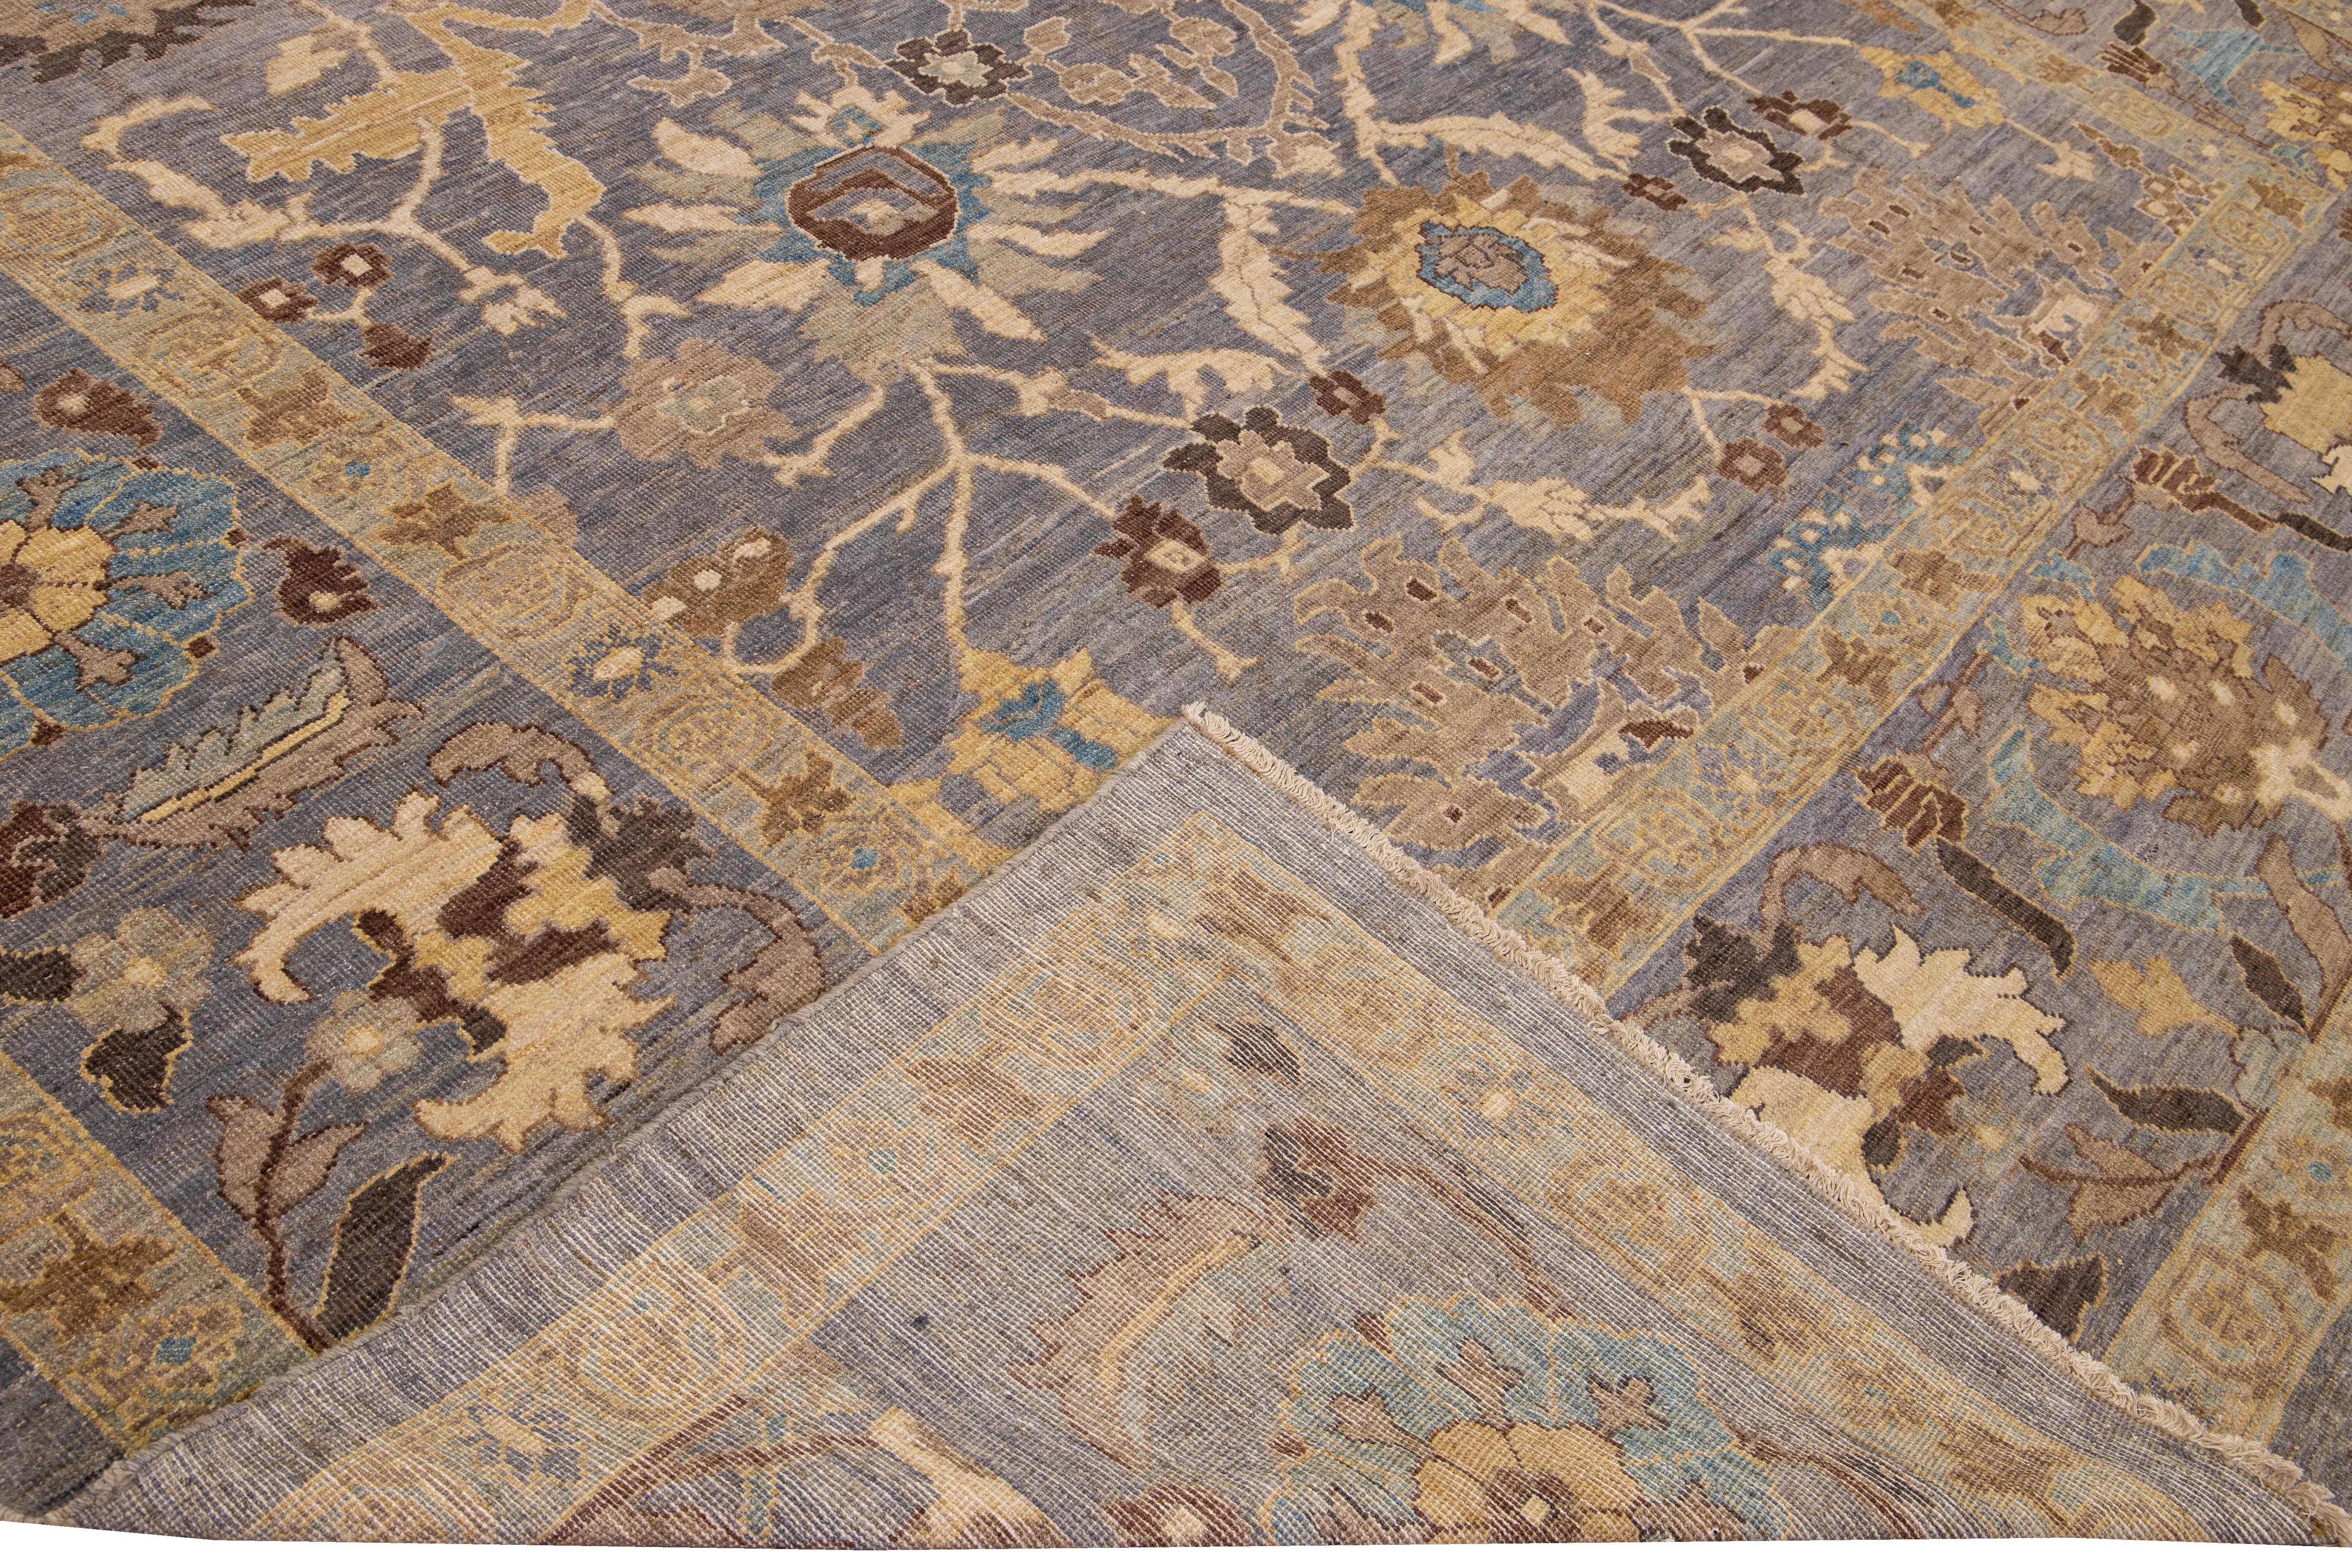 Beautiful modern Sultanabad hand-knotted wool rug with a gray field. This Sultanabad rug has a beige, blue, brown, and goldenrod accent in a gorgeous all-over Classic floral pattern design.

This rug measures: 12' x 18'4